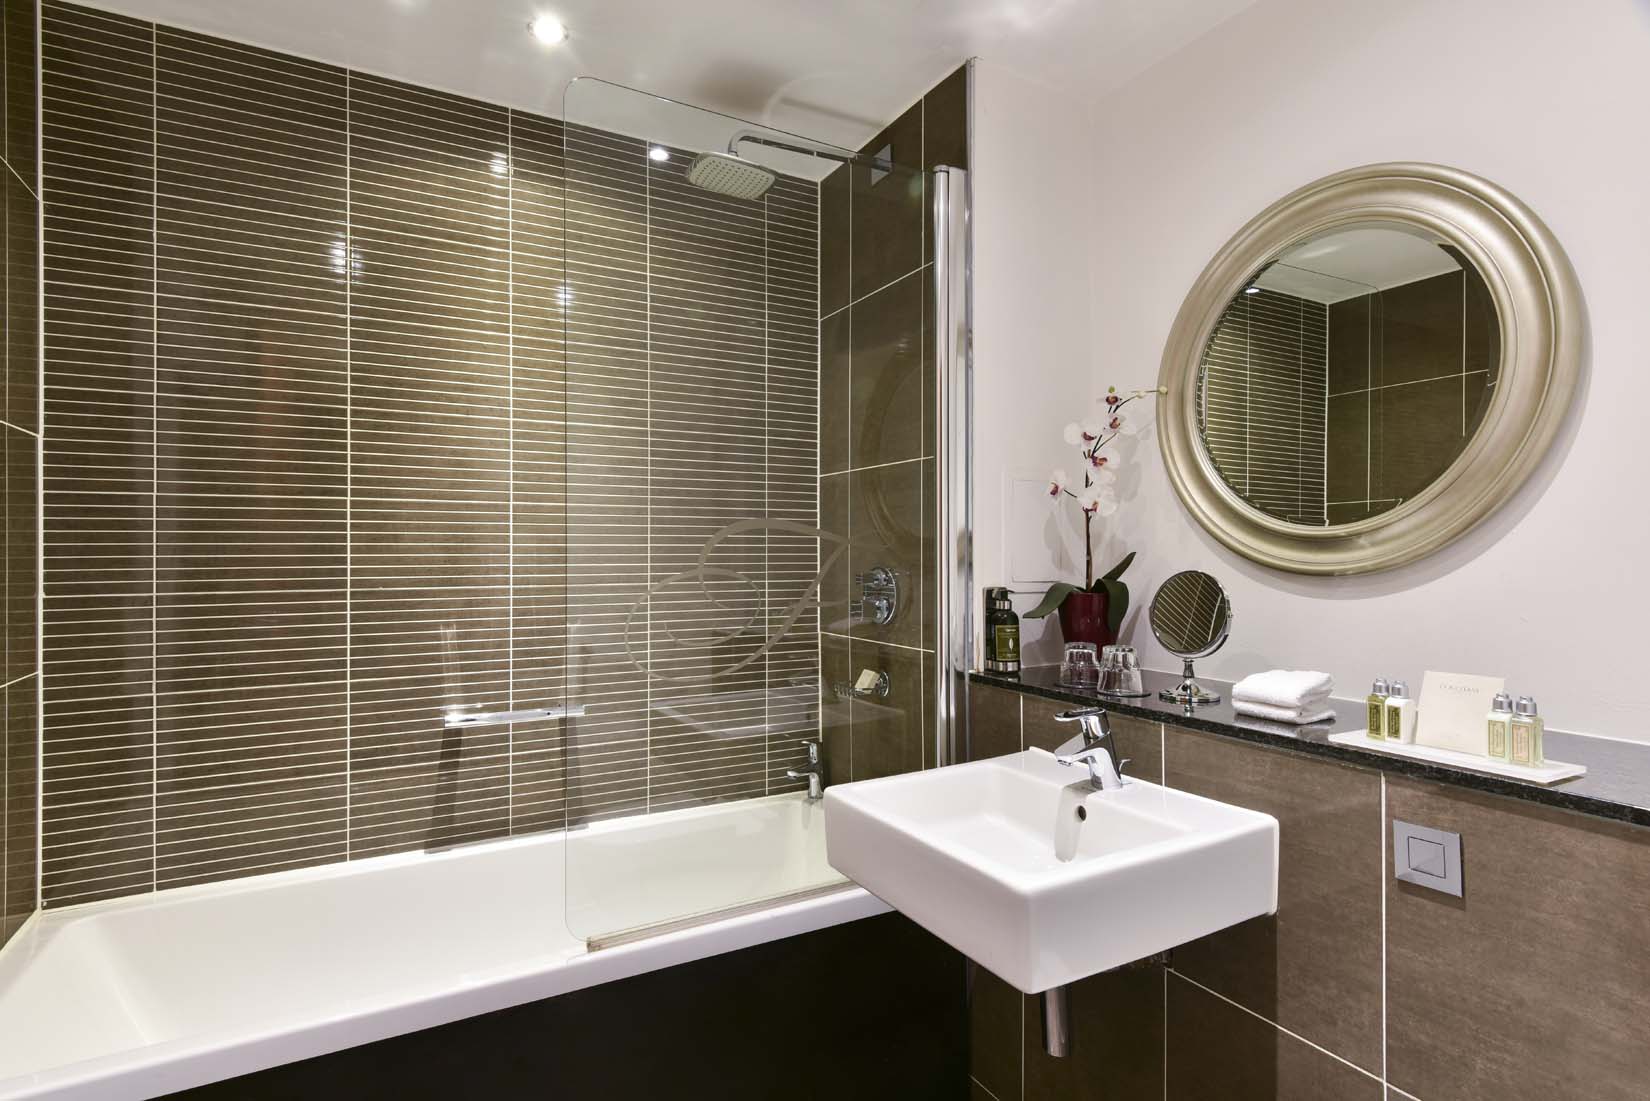 2 bedroom deluxe serviced apartments flat in Glasgow bathroom